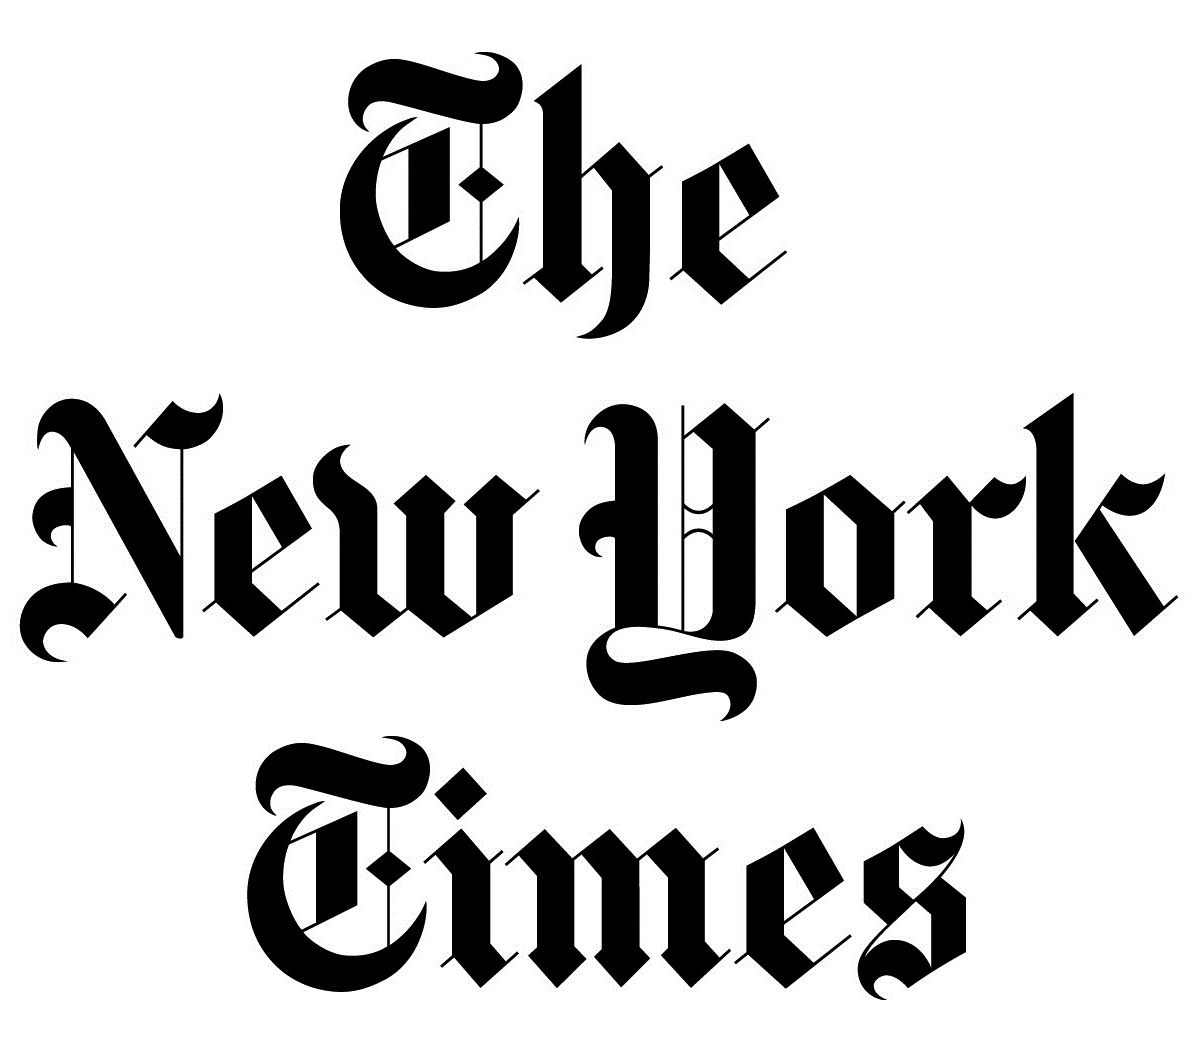 L'Antagoniste reviewed in the New York Times (2015)